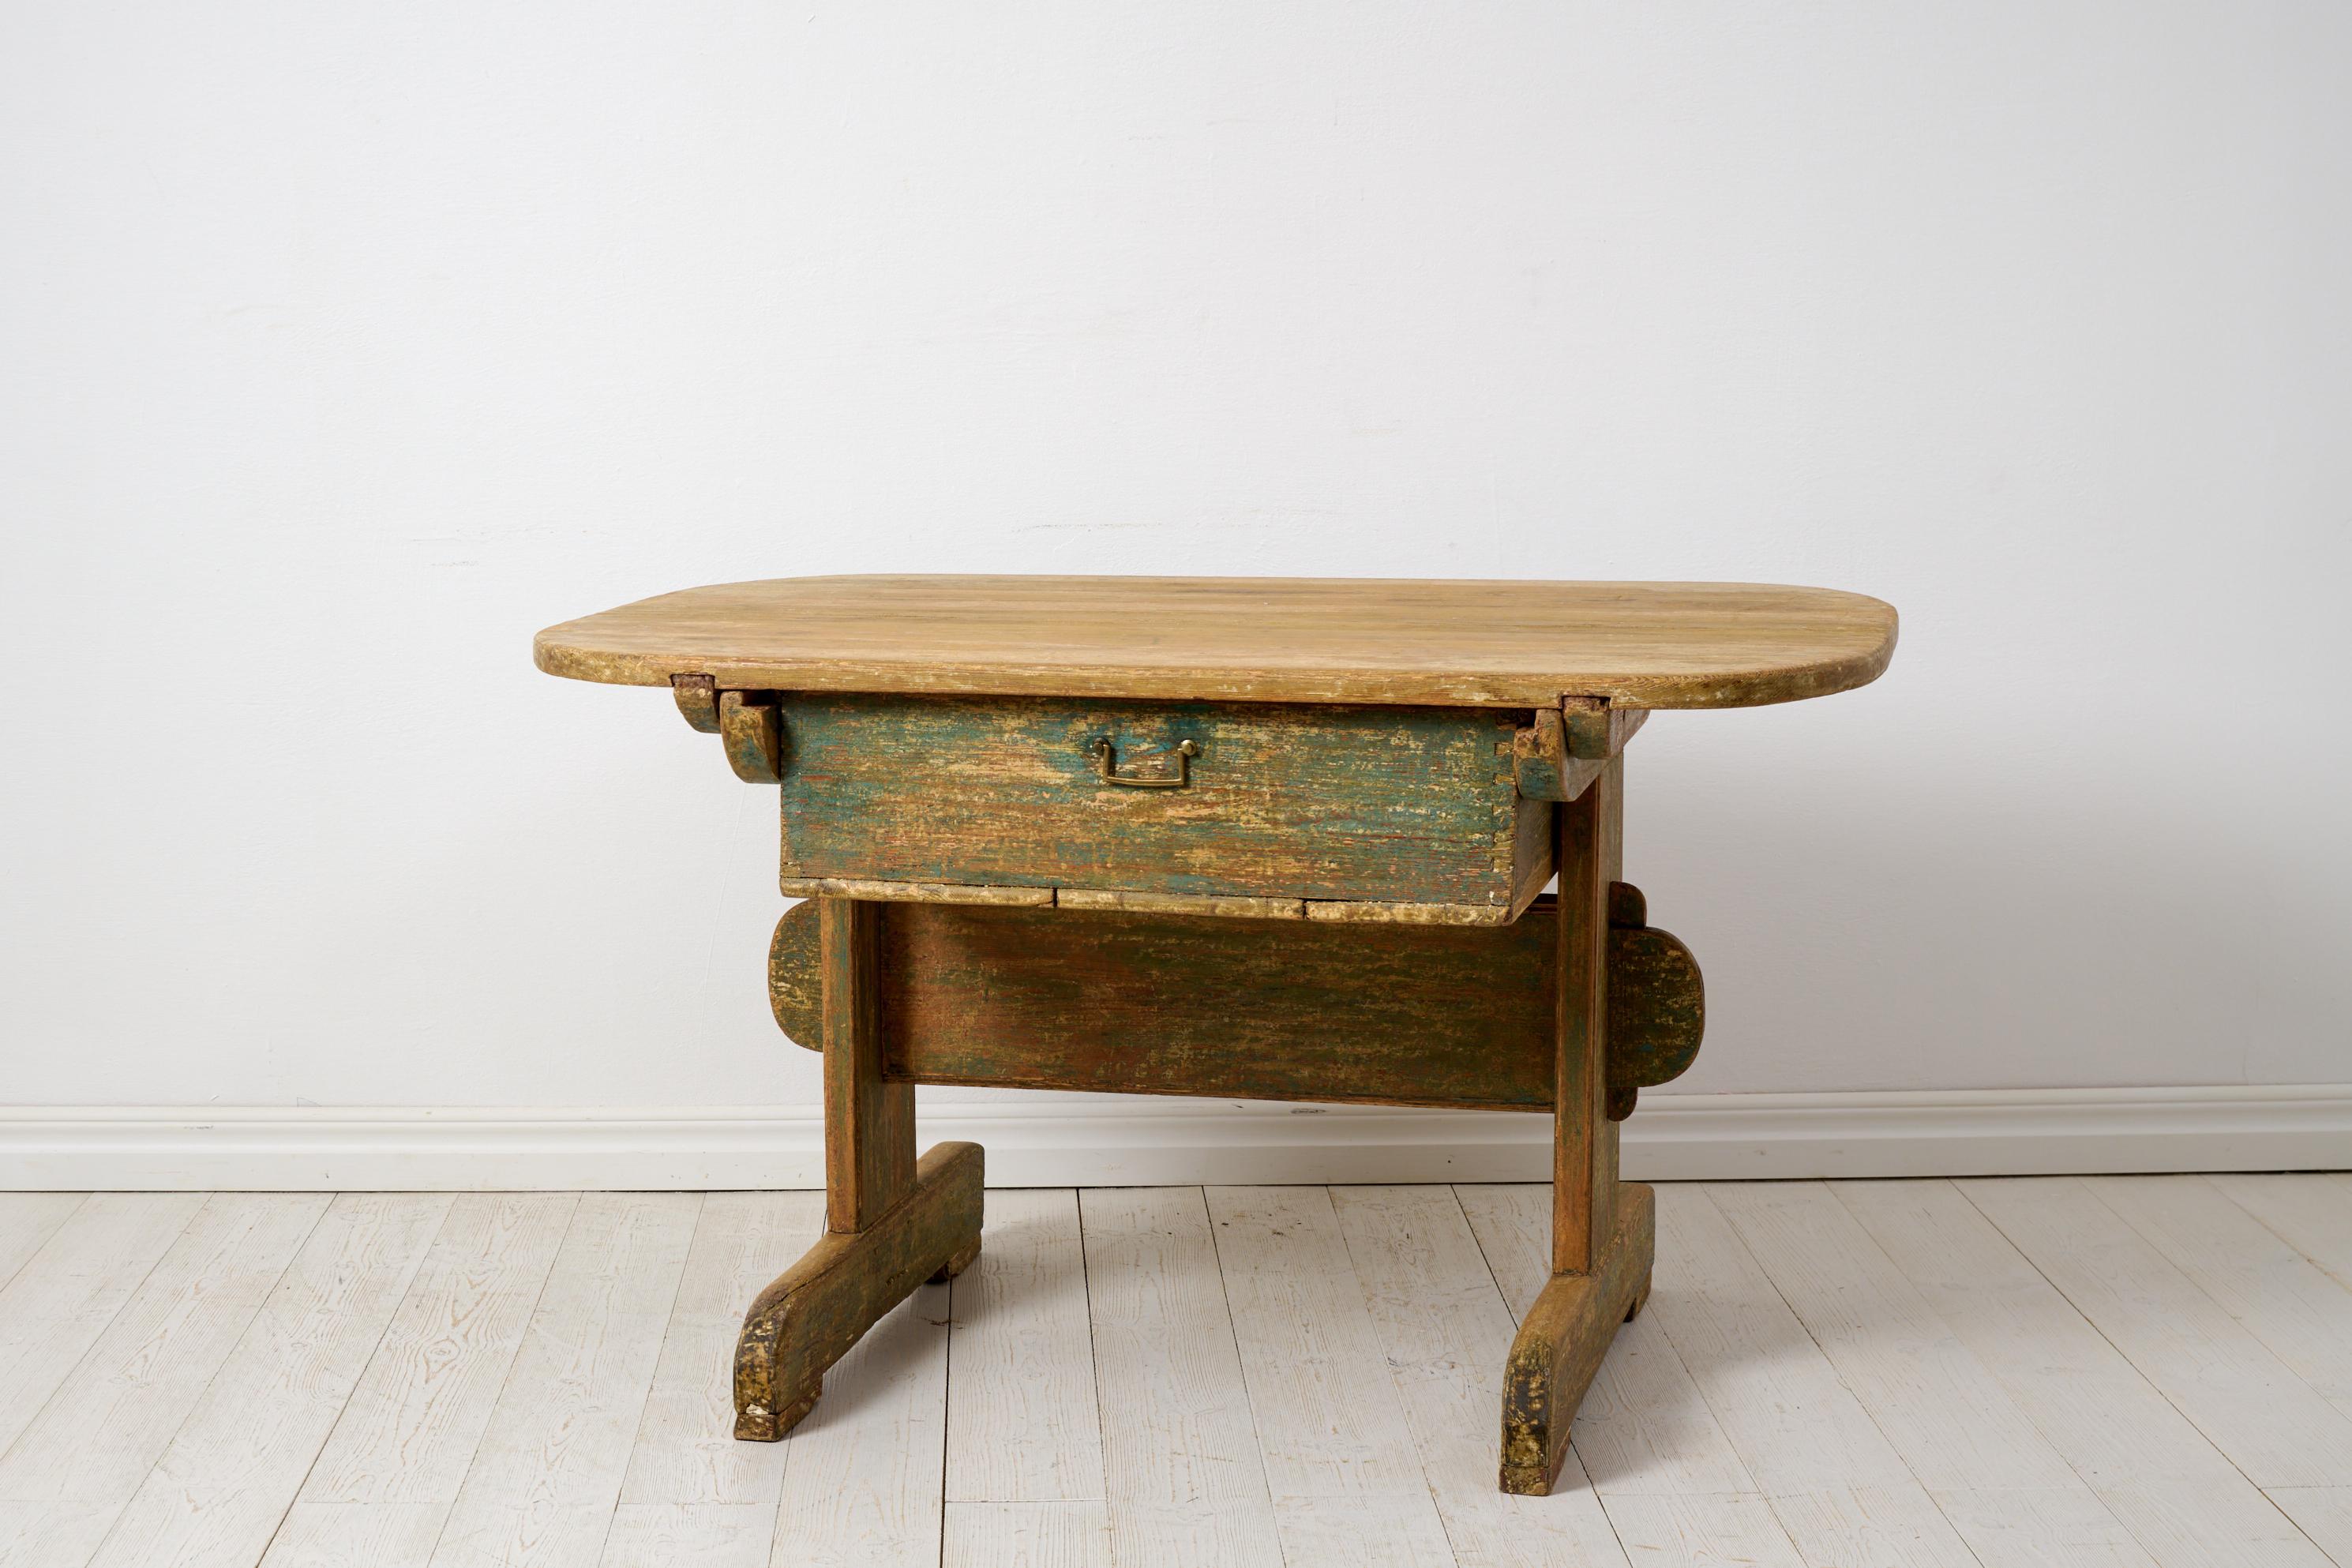 Antique charming country table from northern Sweden. The table is a rare and unique table with a drawer, from the late 1700s. This is made in a trestle model which is the oldest type of table, dating back to the medieval ages. Sturdy and well made,